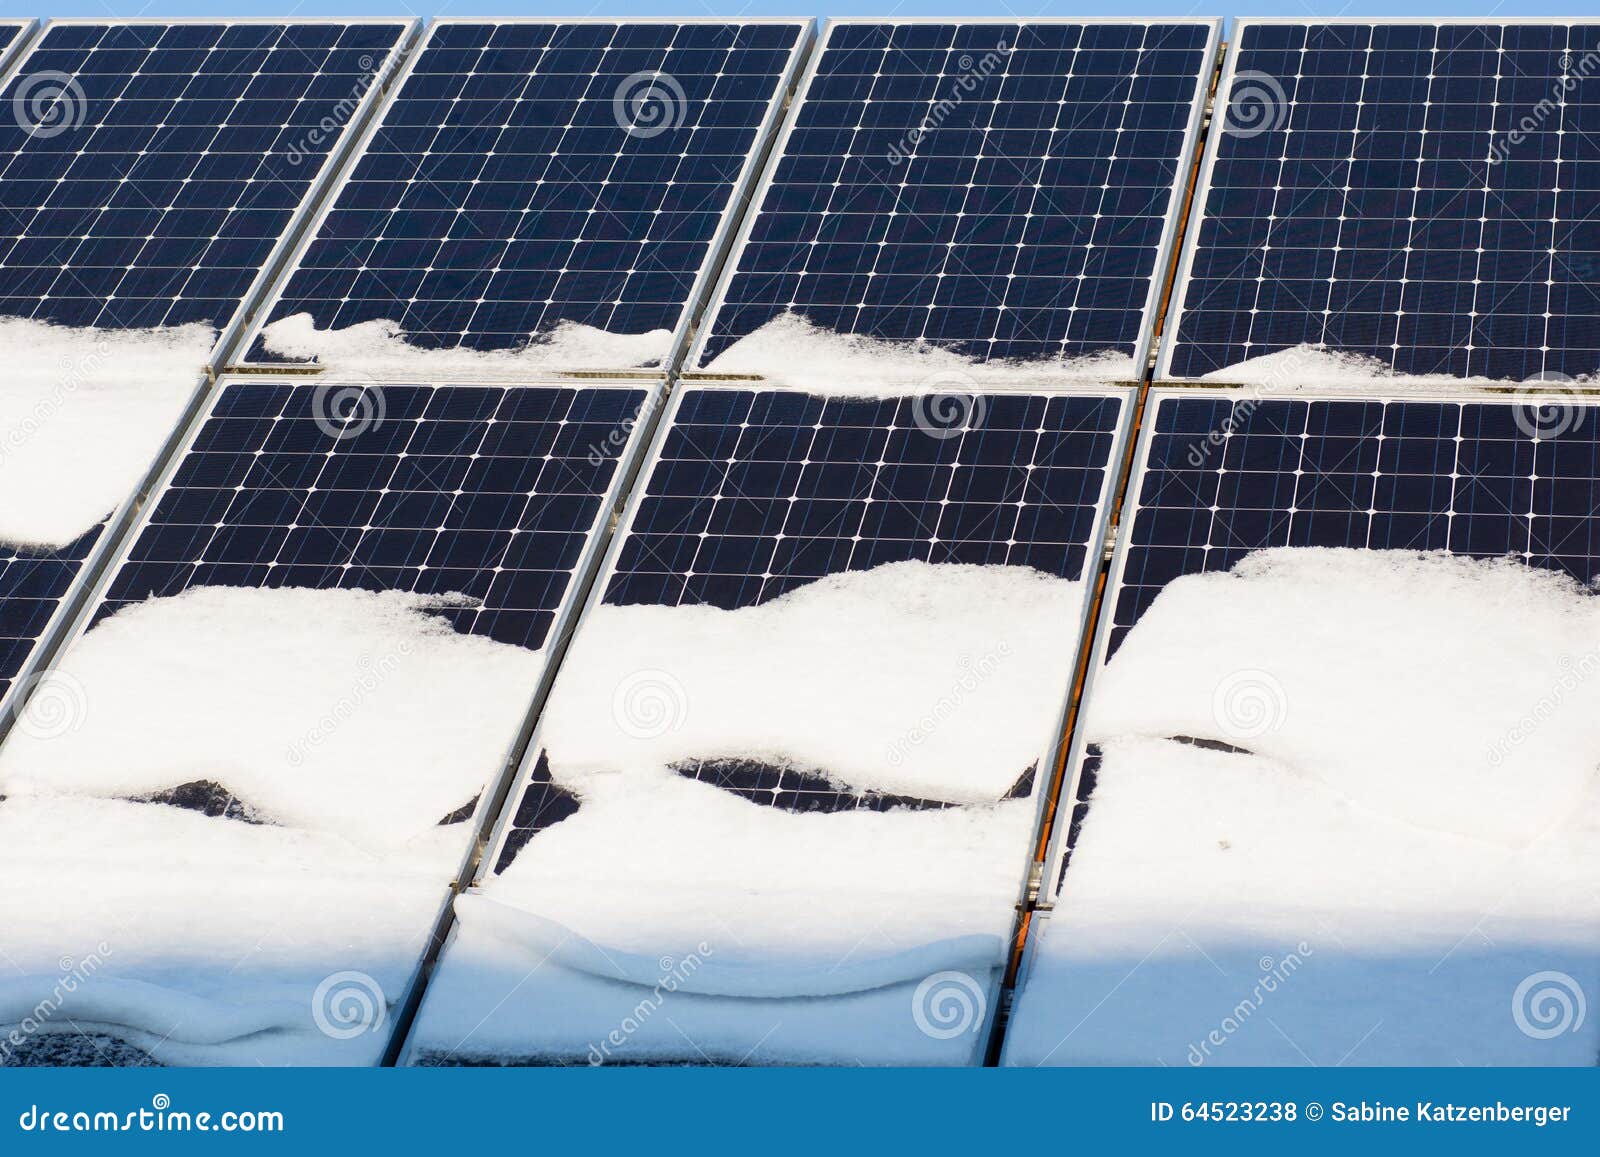 Photovoltaic panels on the roof with snow, with a snow shovel in